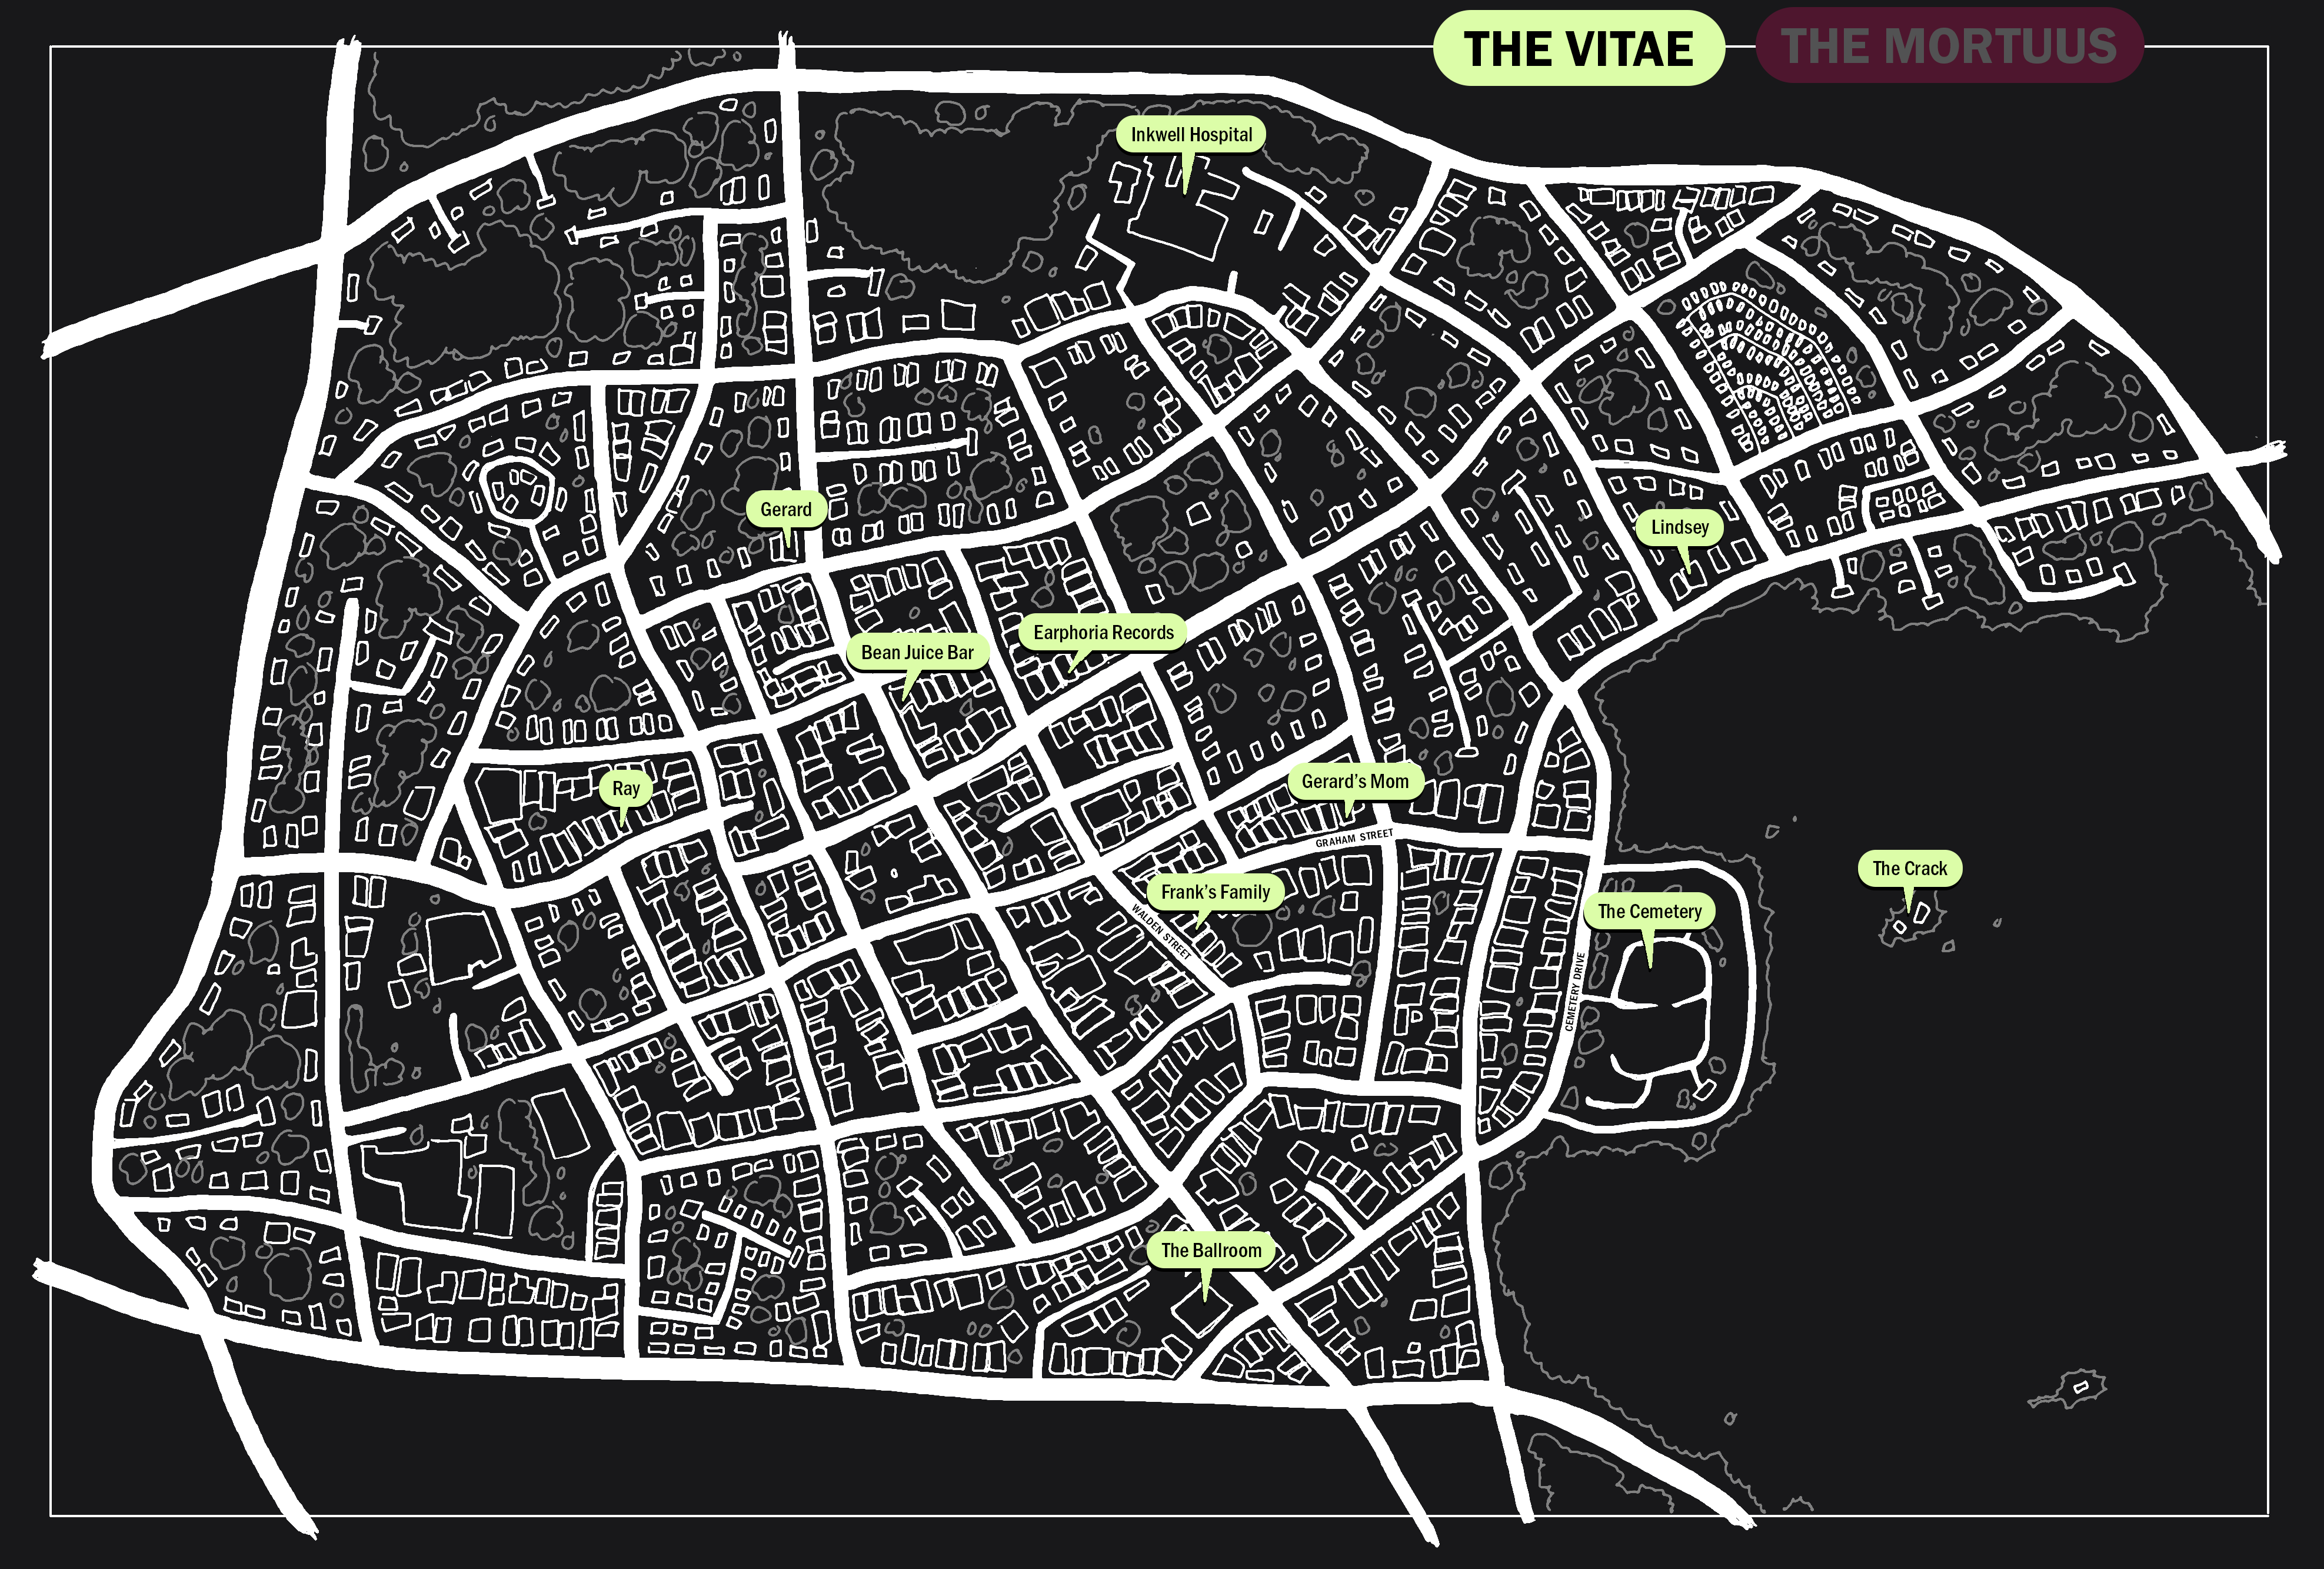 map of inkwell with locations in the vitae marked, such as where gerard and ray live, the bean juice bar, the ballroom, earphoria records, inkwell hospital, the cemetery, and the crack, which is far out in the woods